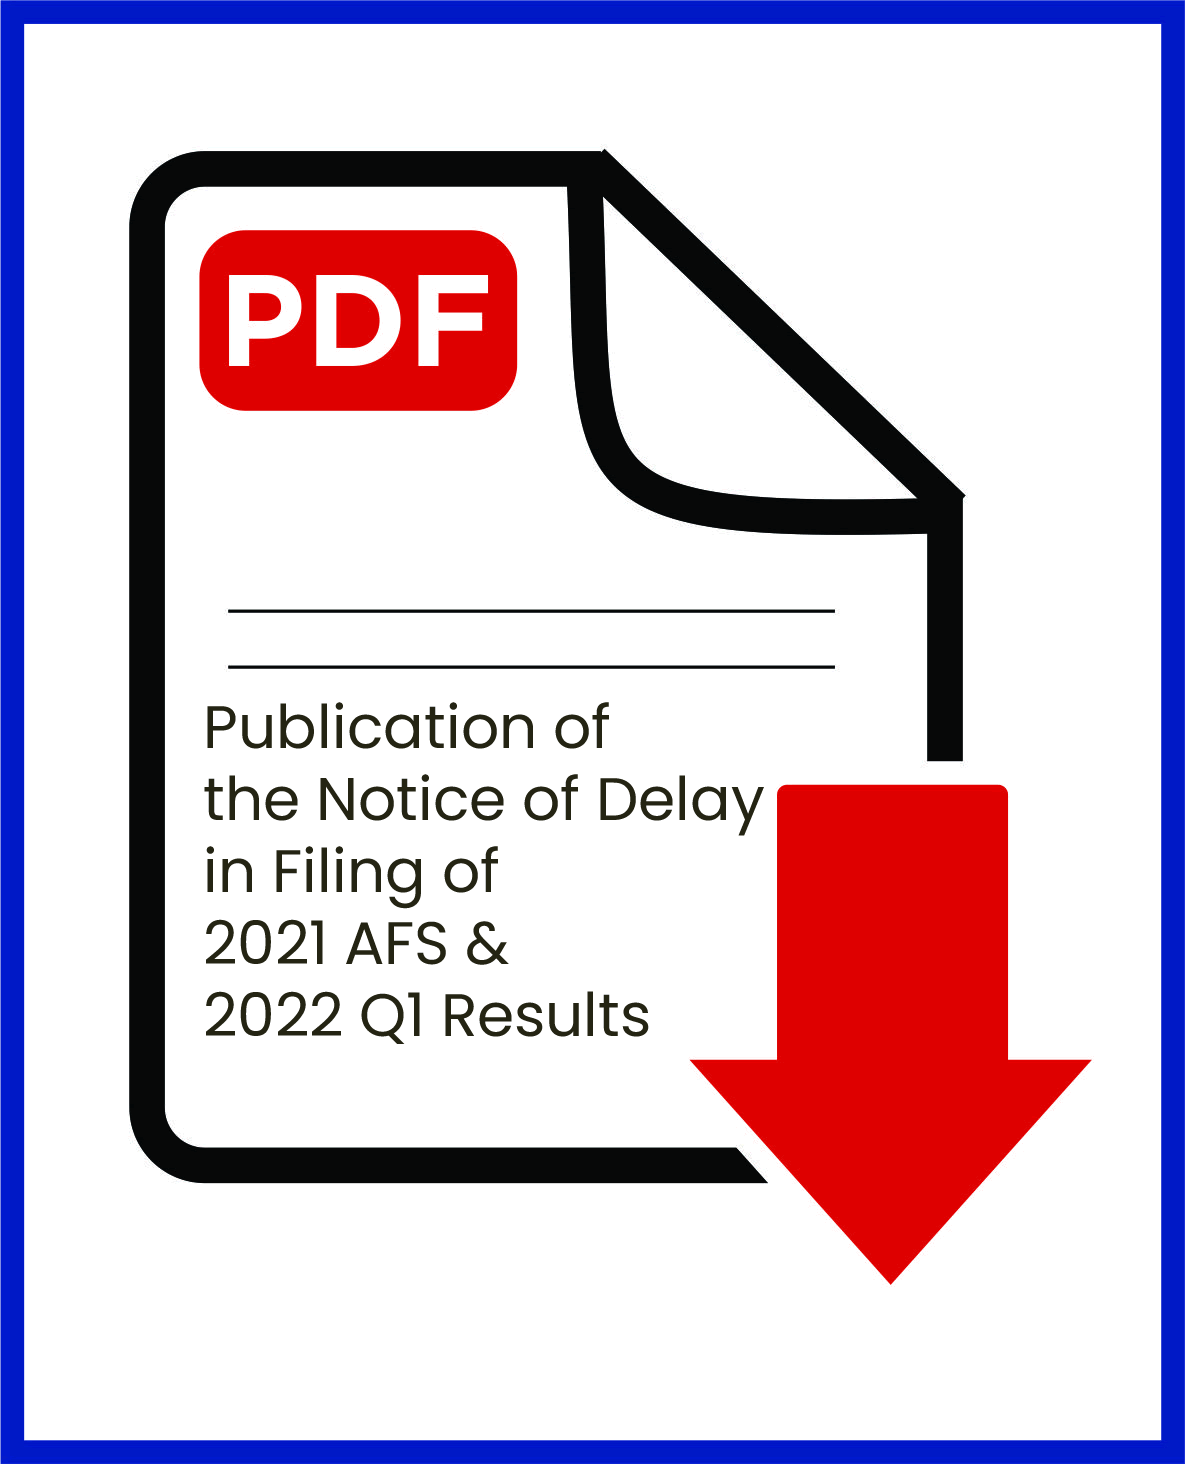 Publication of the Notice of Delay in Filing of 2021 AFS & 2022 Q1 Results (Vanguard Newspaper)